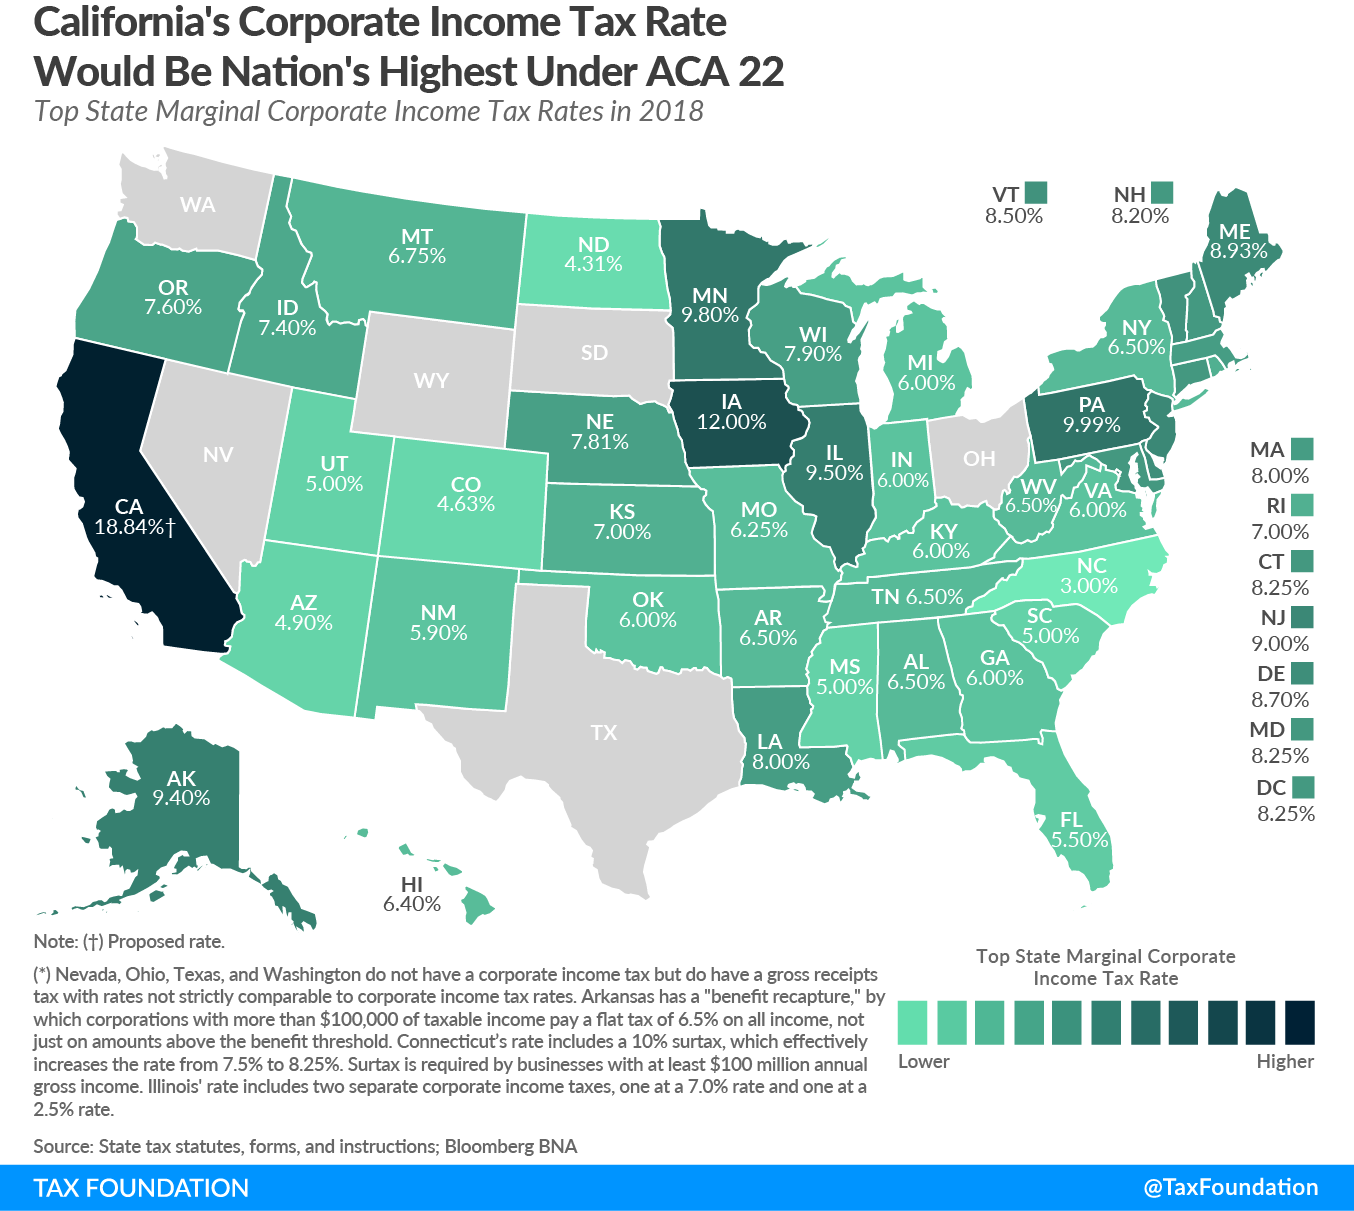 California's Corporate Income Tax Rate Would Be Nation's Highest Under ACA 22